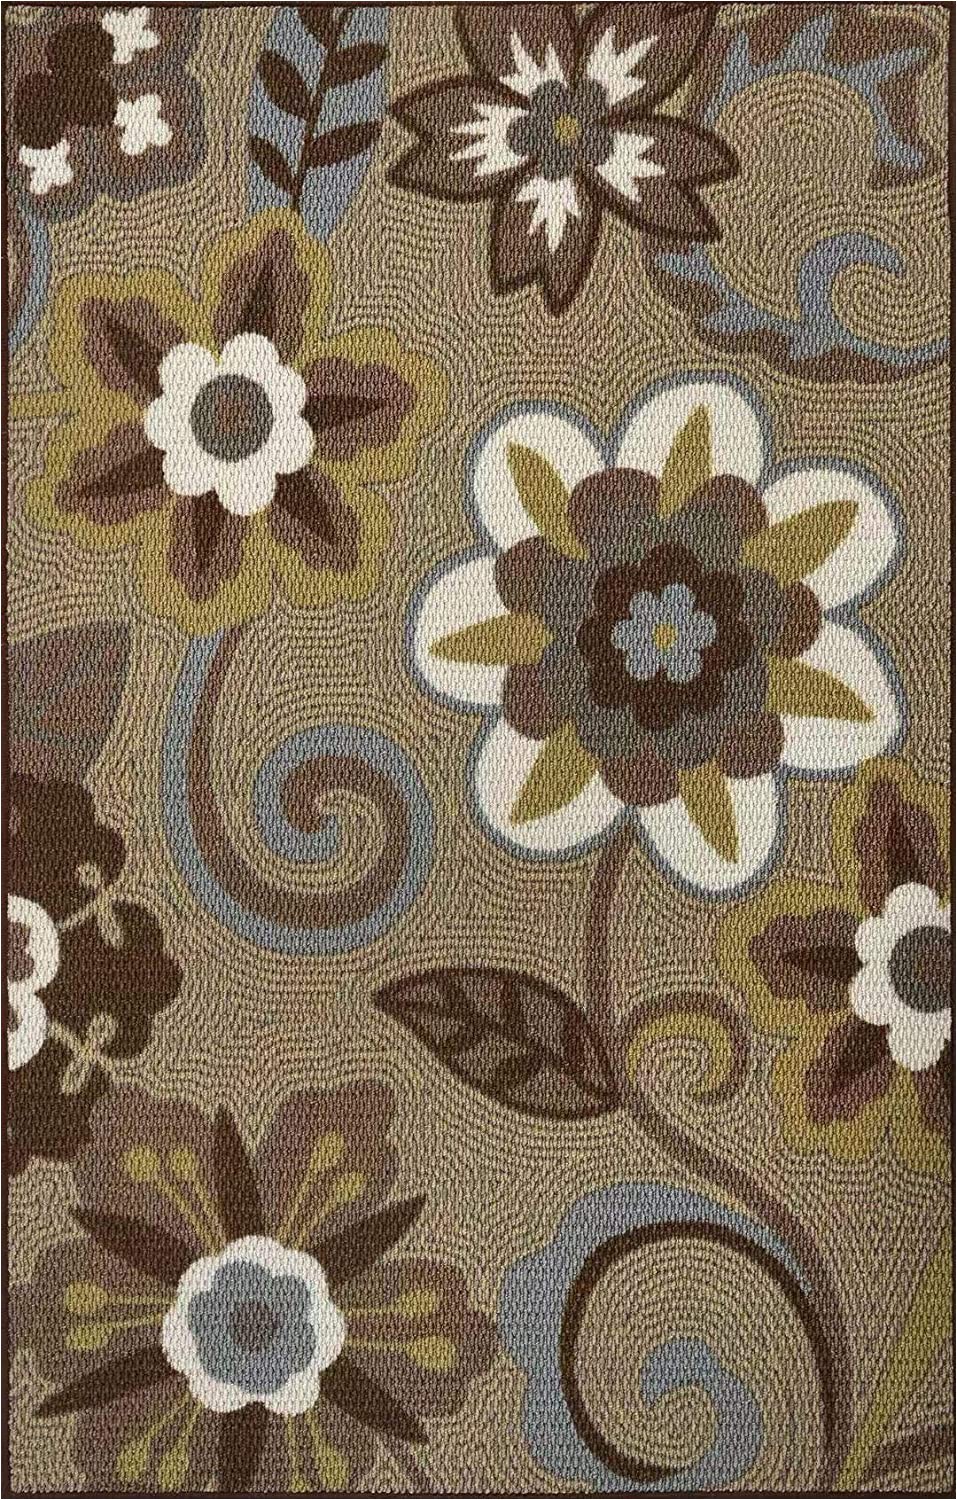 Rubber Mats for Under area Rugs Amazon Majestic Looms Dav5 Beige Brown Floral Non Slip